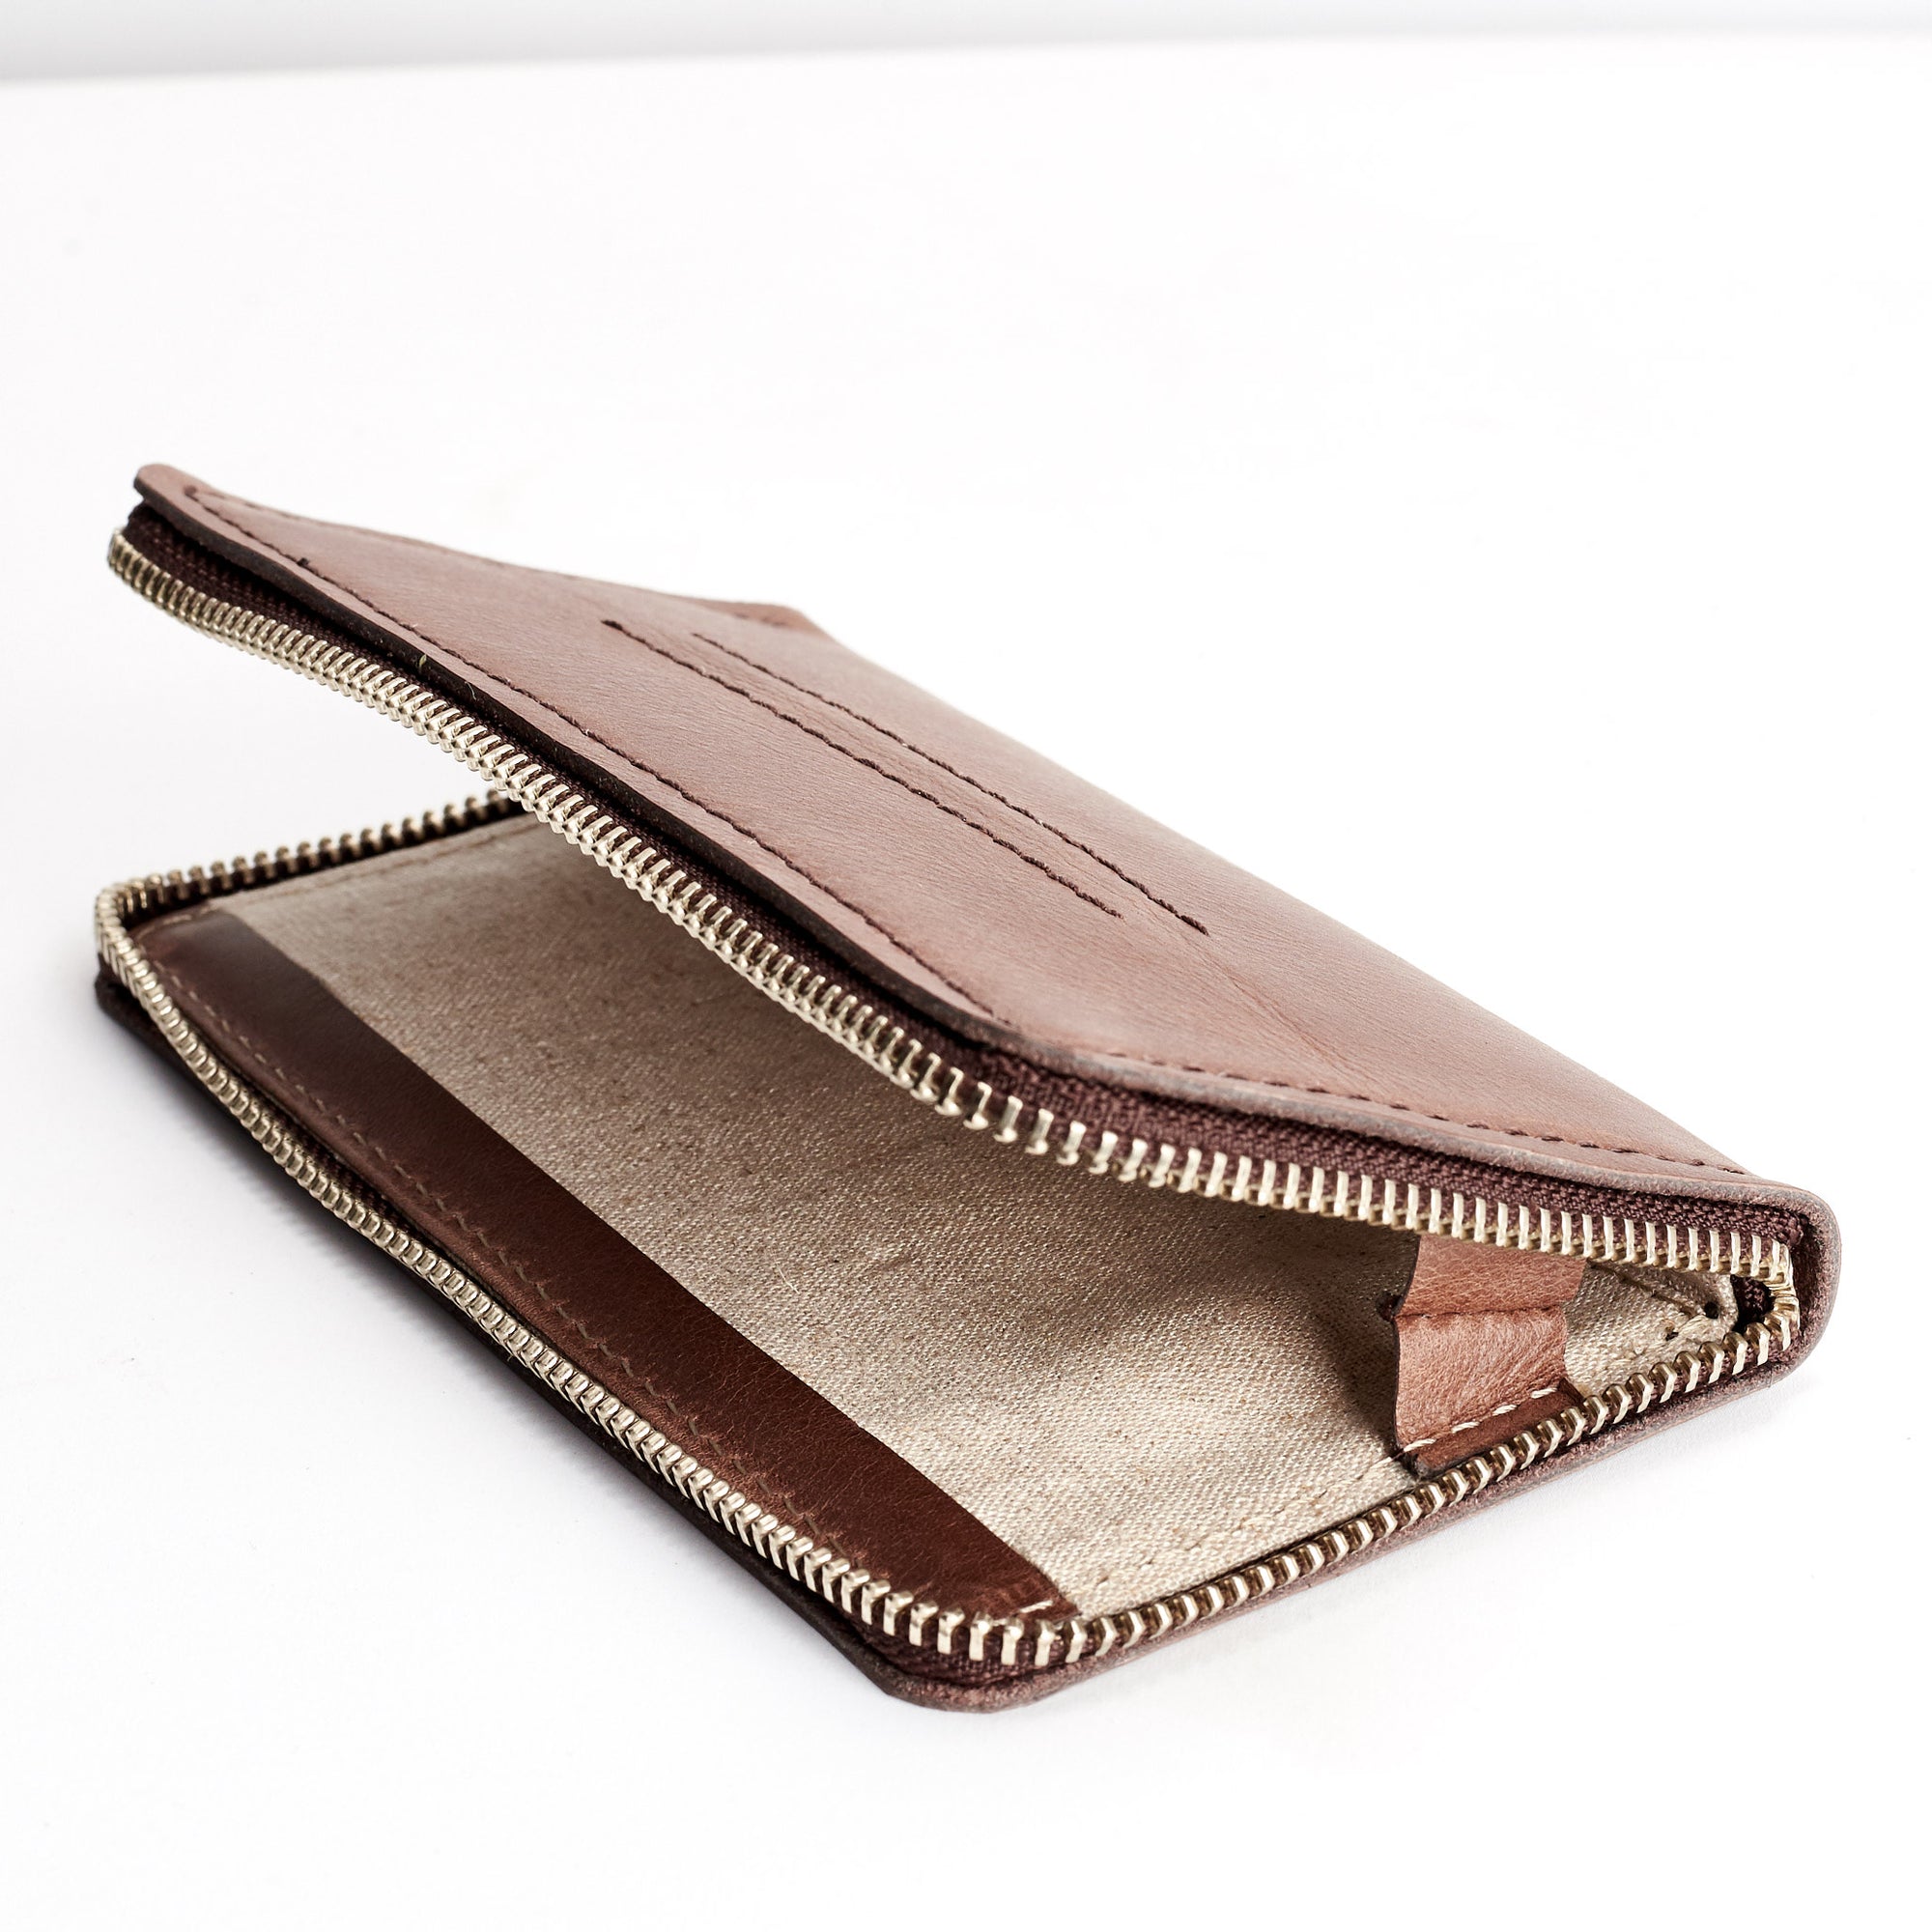 Detail linen interior. Brown iPhone leather wallet stand case for mens gifts.  iPhone x, iPhone 10, iPhone 8 plus leather stand sleeve